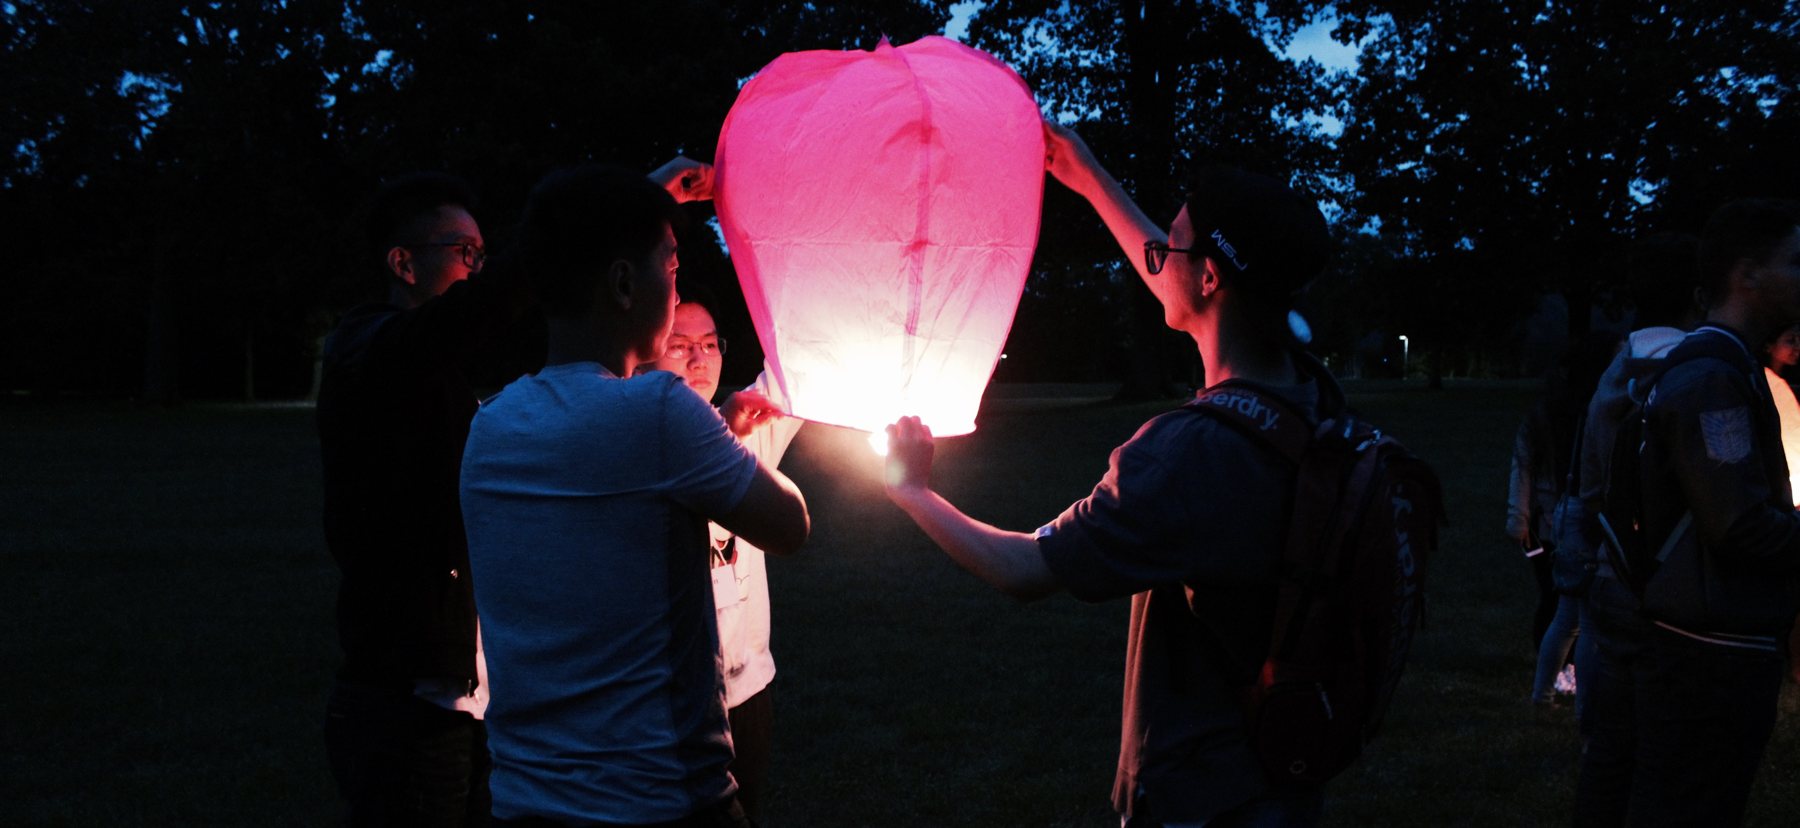 Students at night with lantern